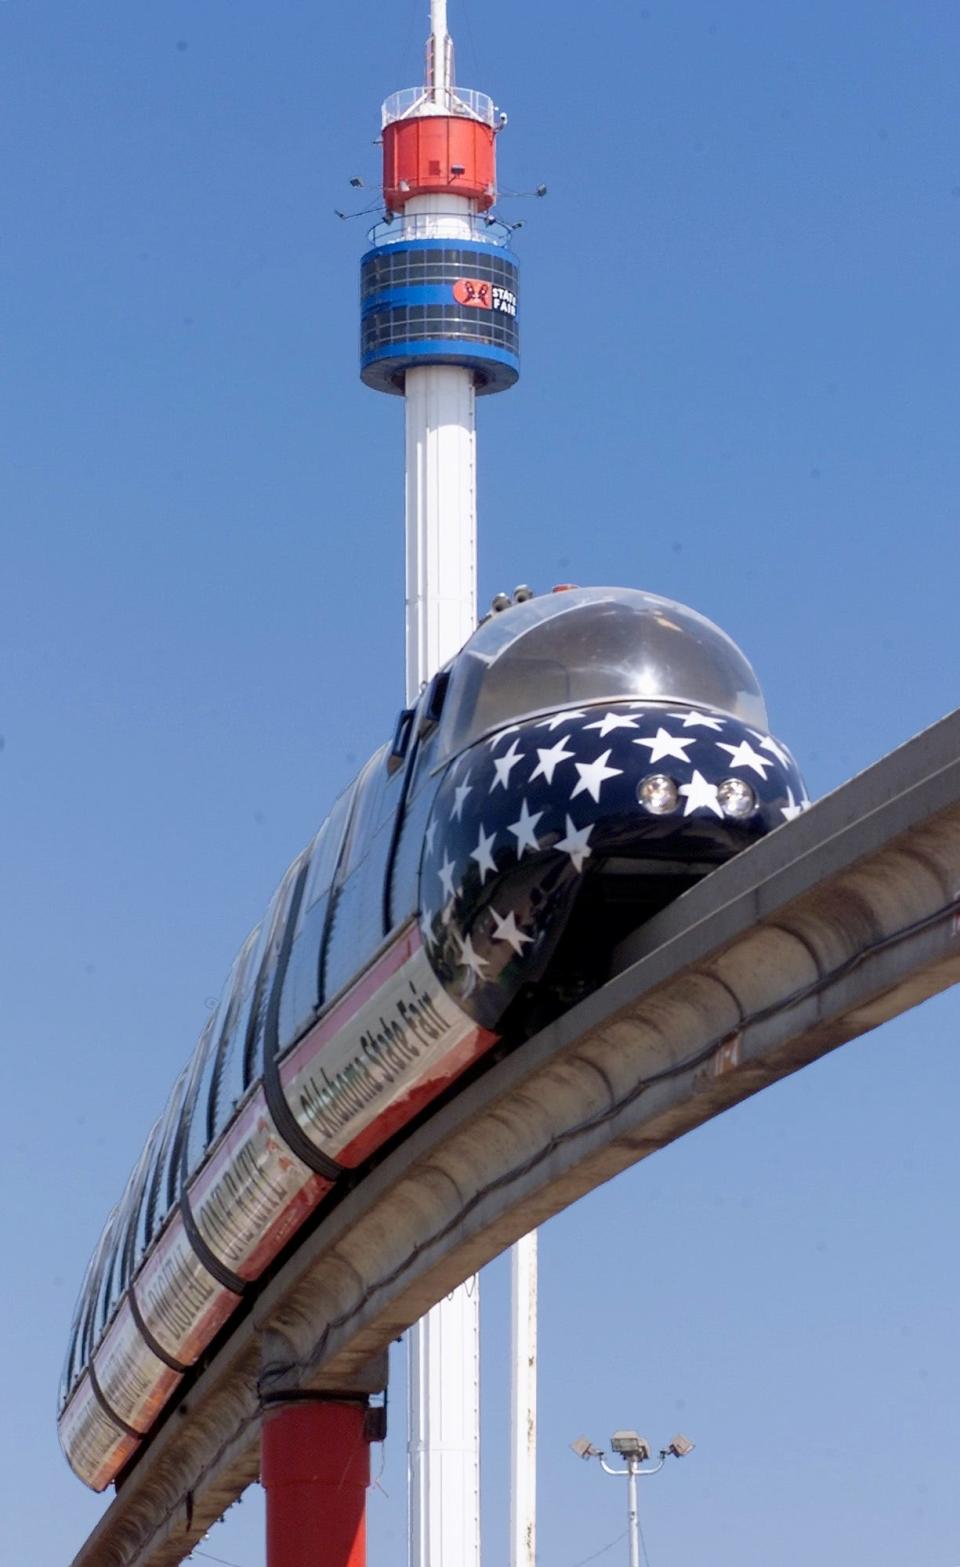 RIDES: AT&T Wireless Monorail and Conoco Space Needle pictured at Oklahoma State Fair 2001.  Staff Photo by Roger Klock